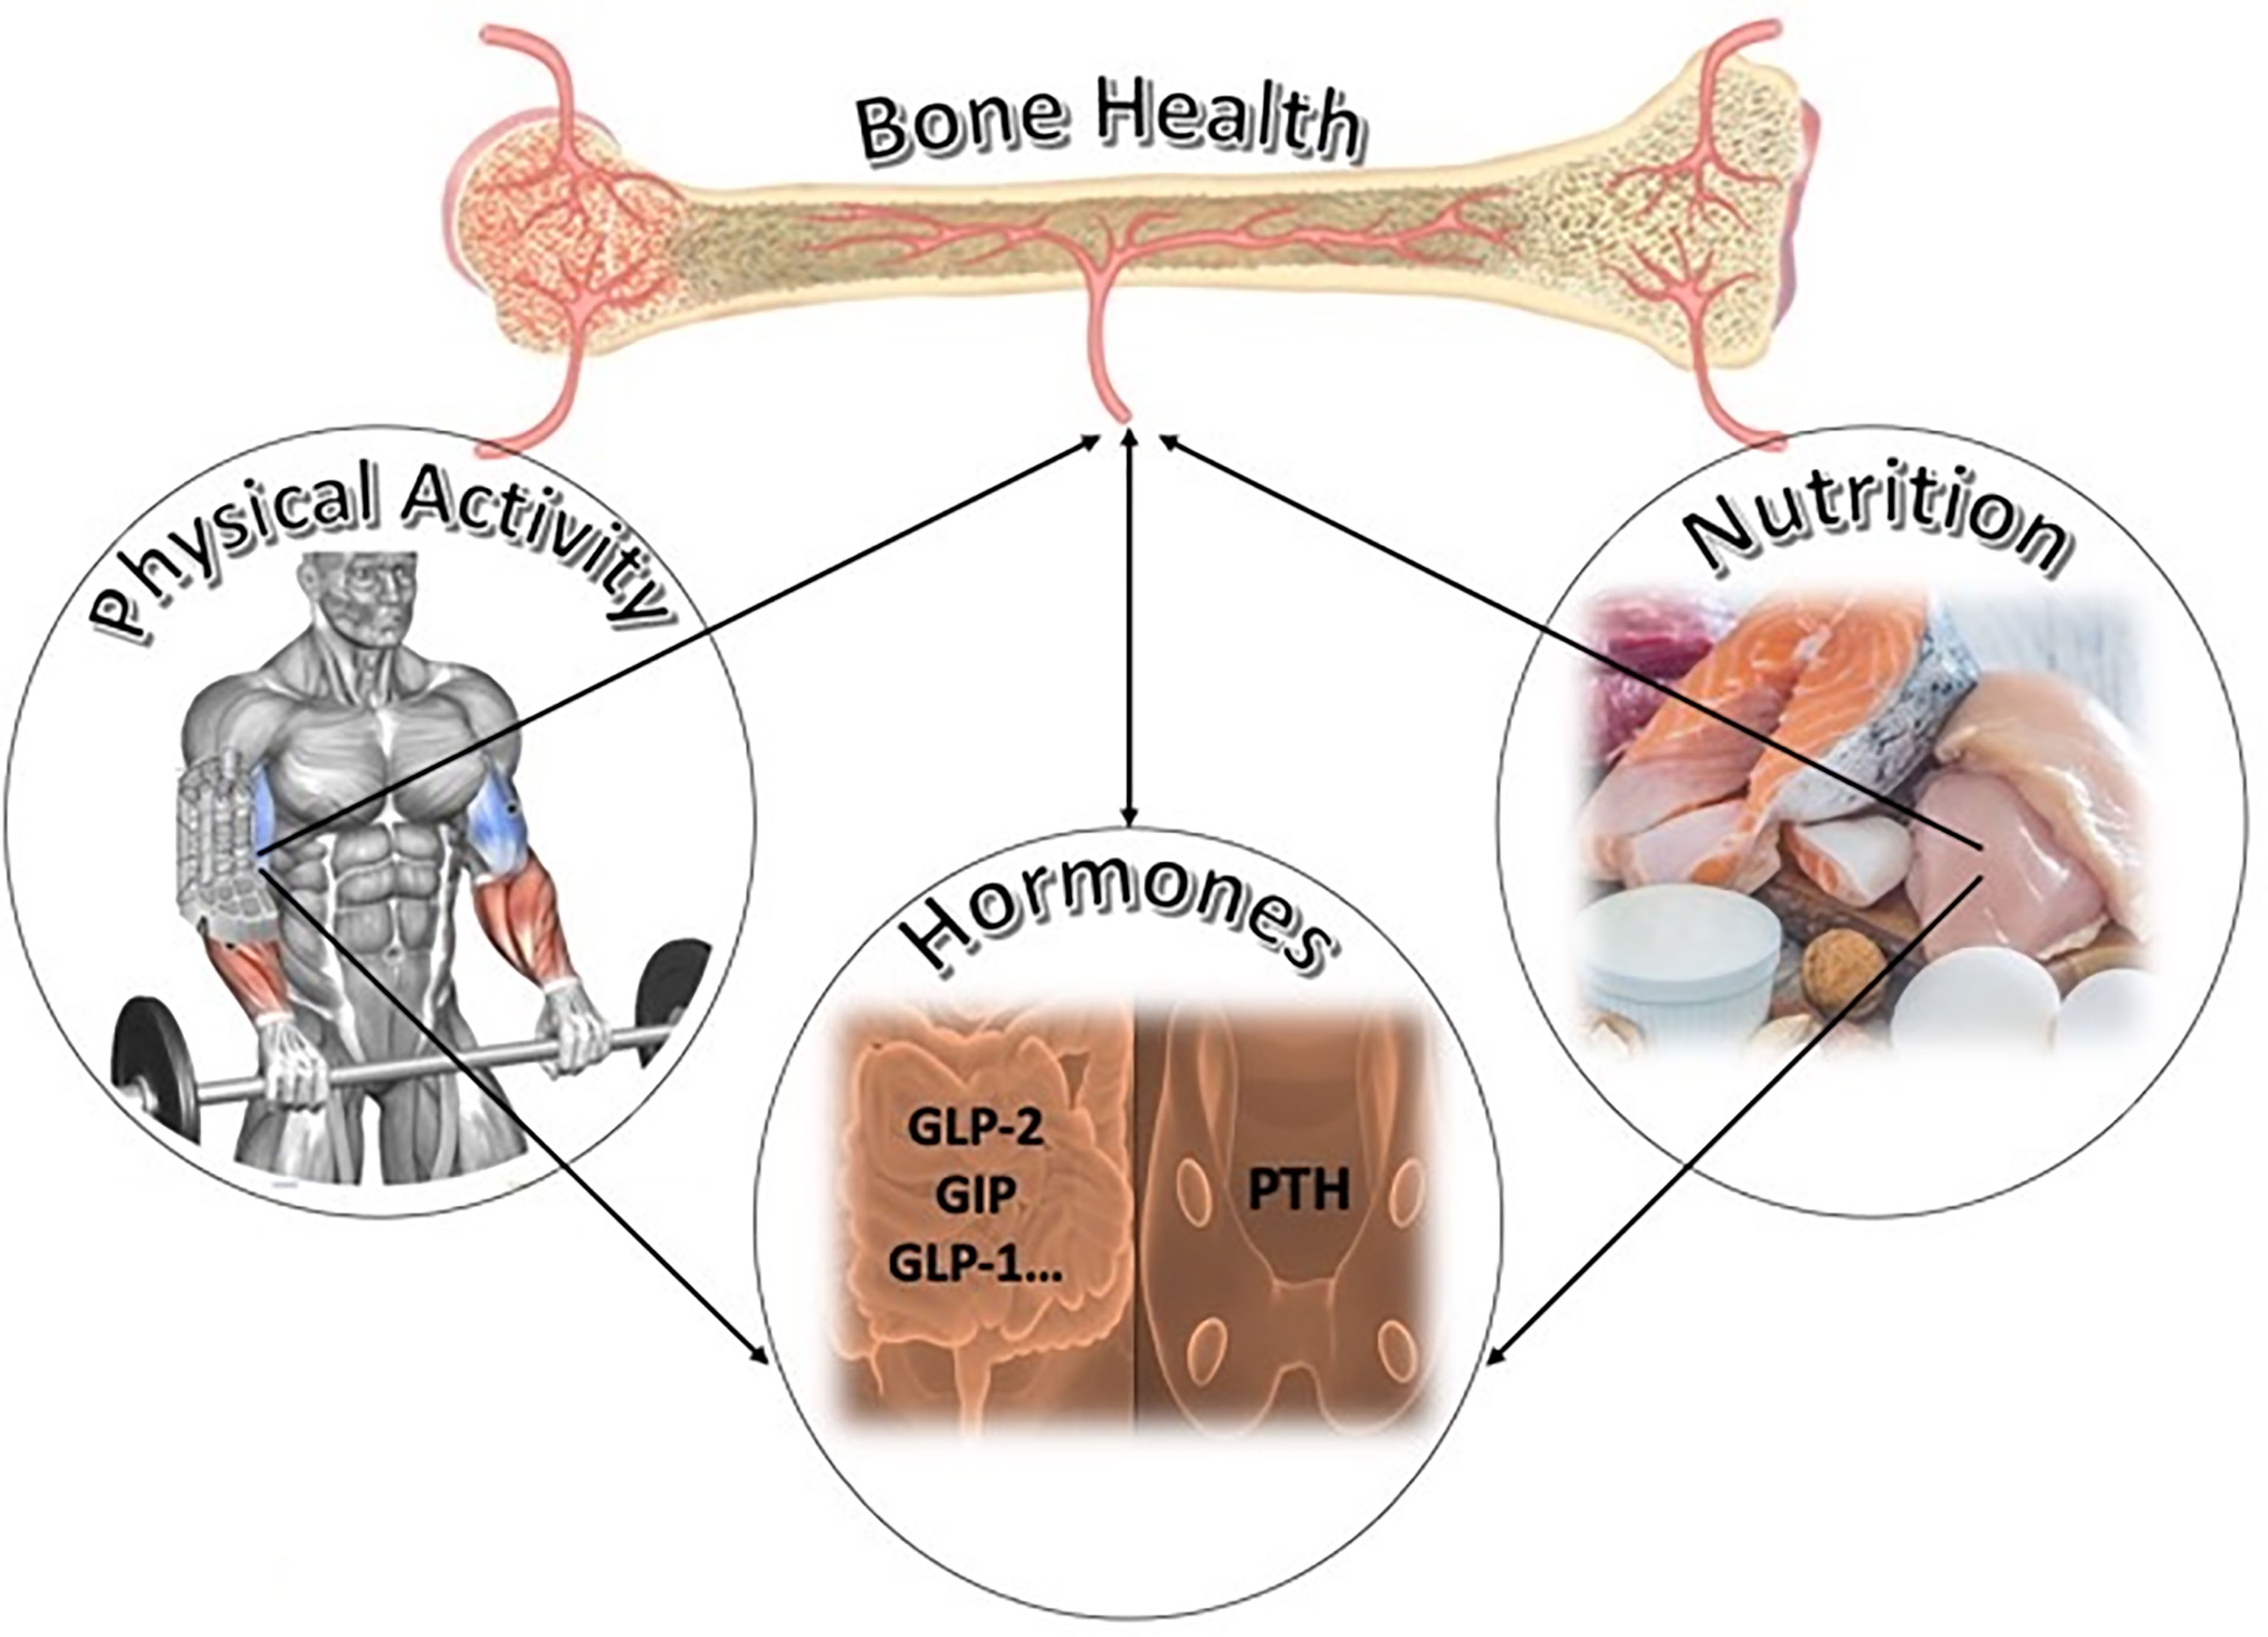 Frontiers | The Impact of Diet and Physical Activity on Bone Health in Children and Adolescents